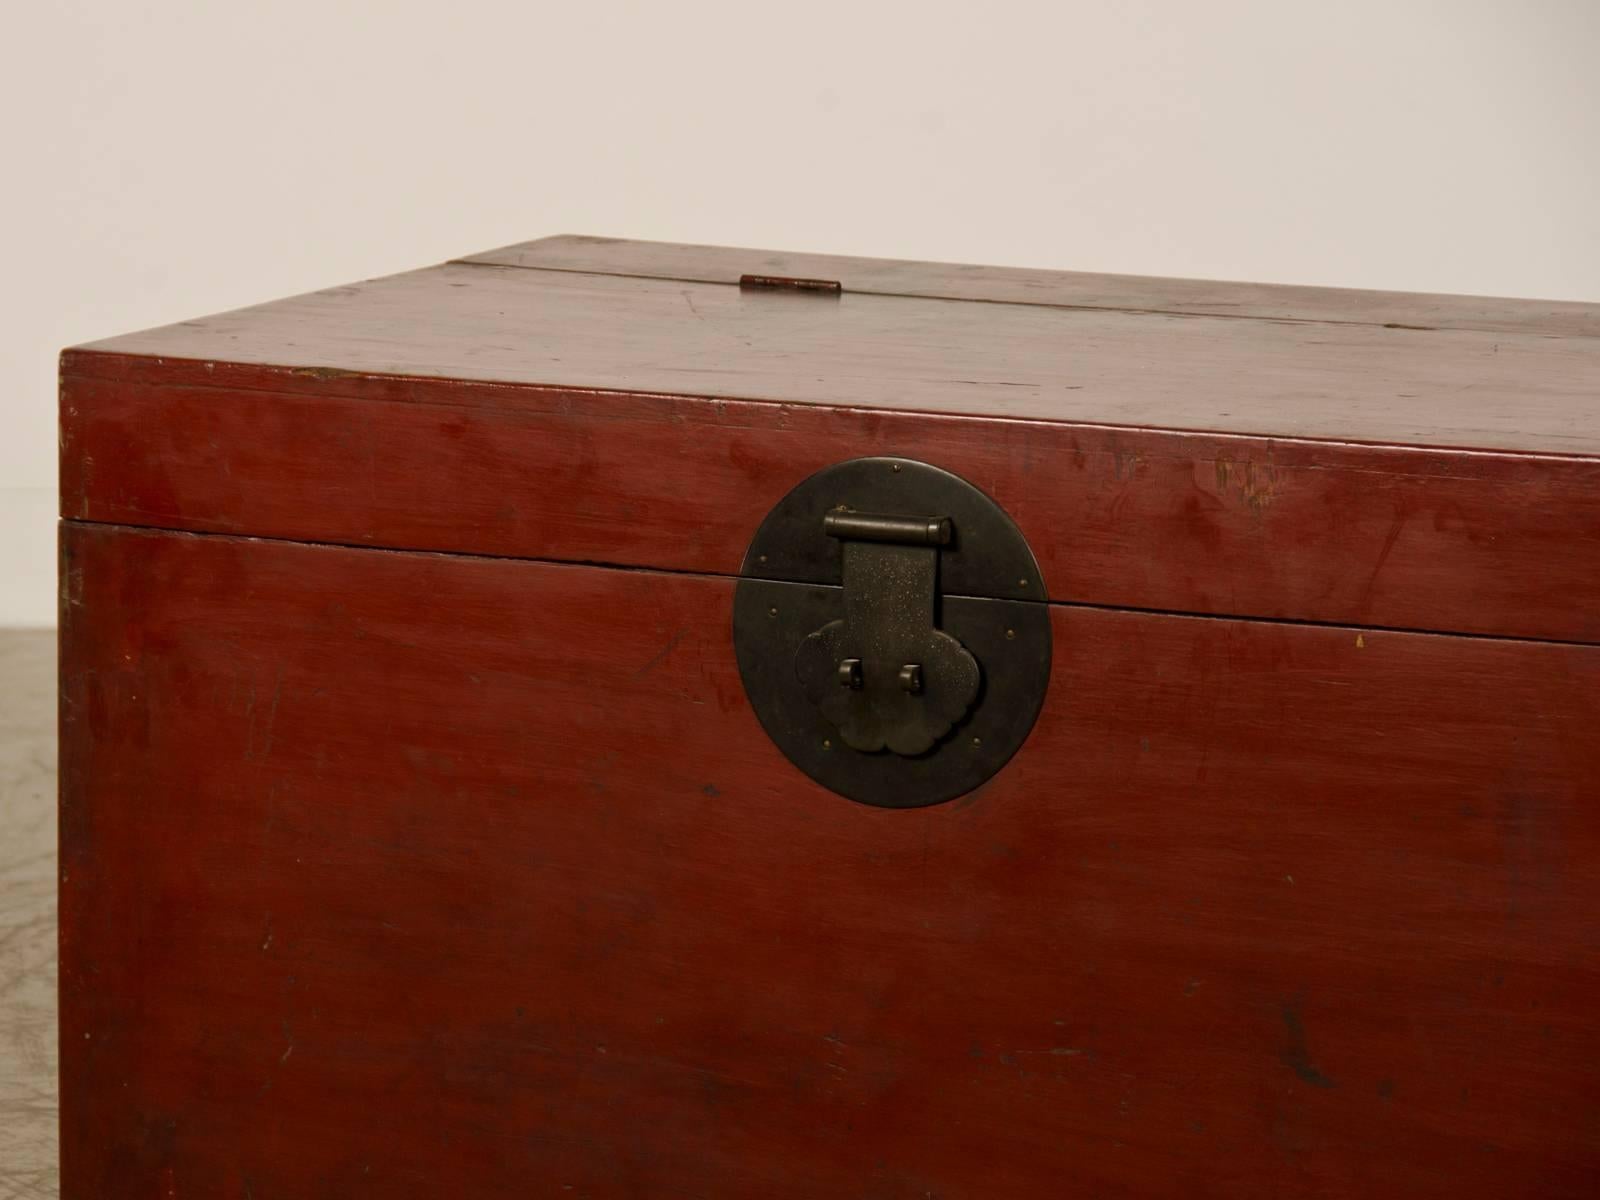 A large antique Chinese red lacquer trunk from the Kuang Hsu period in China, circa 1875 the original metal hardware. The trunk is slightly raised with a top that lifts to reveal the interior storage space. Because the trunk is finished on all four